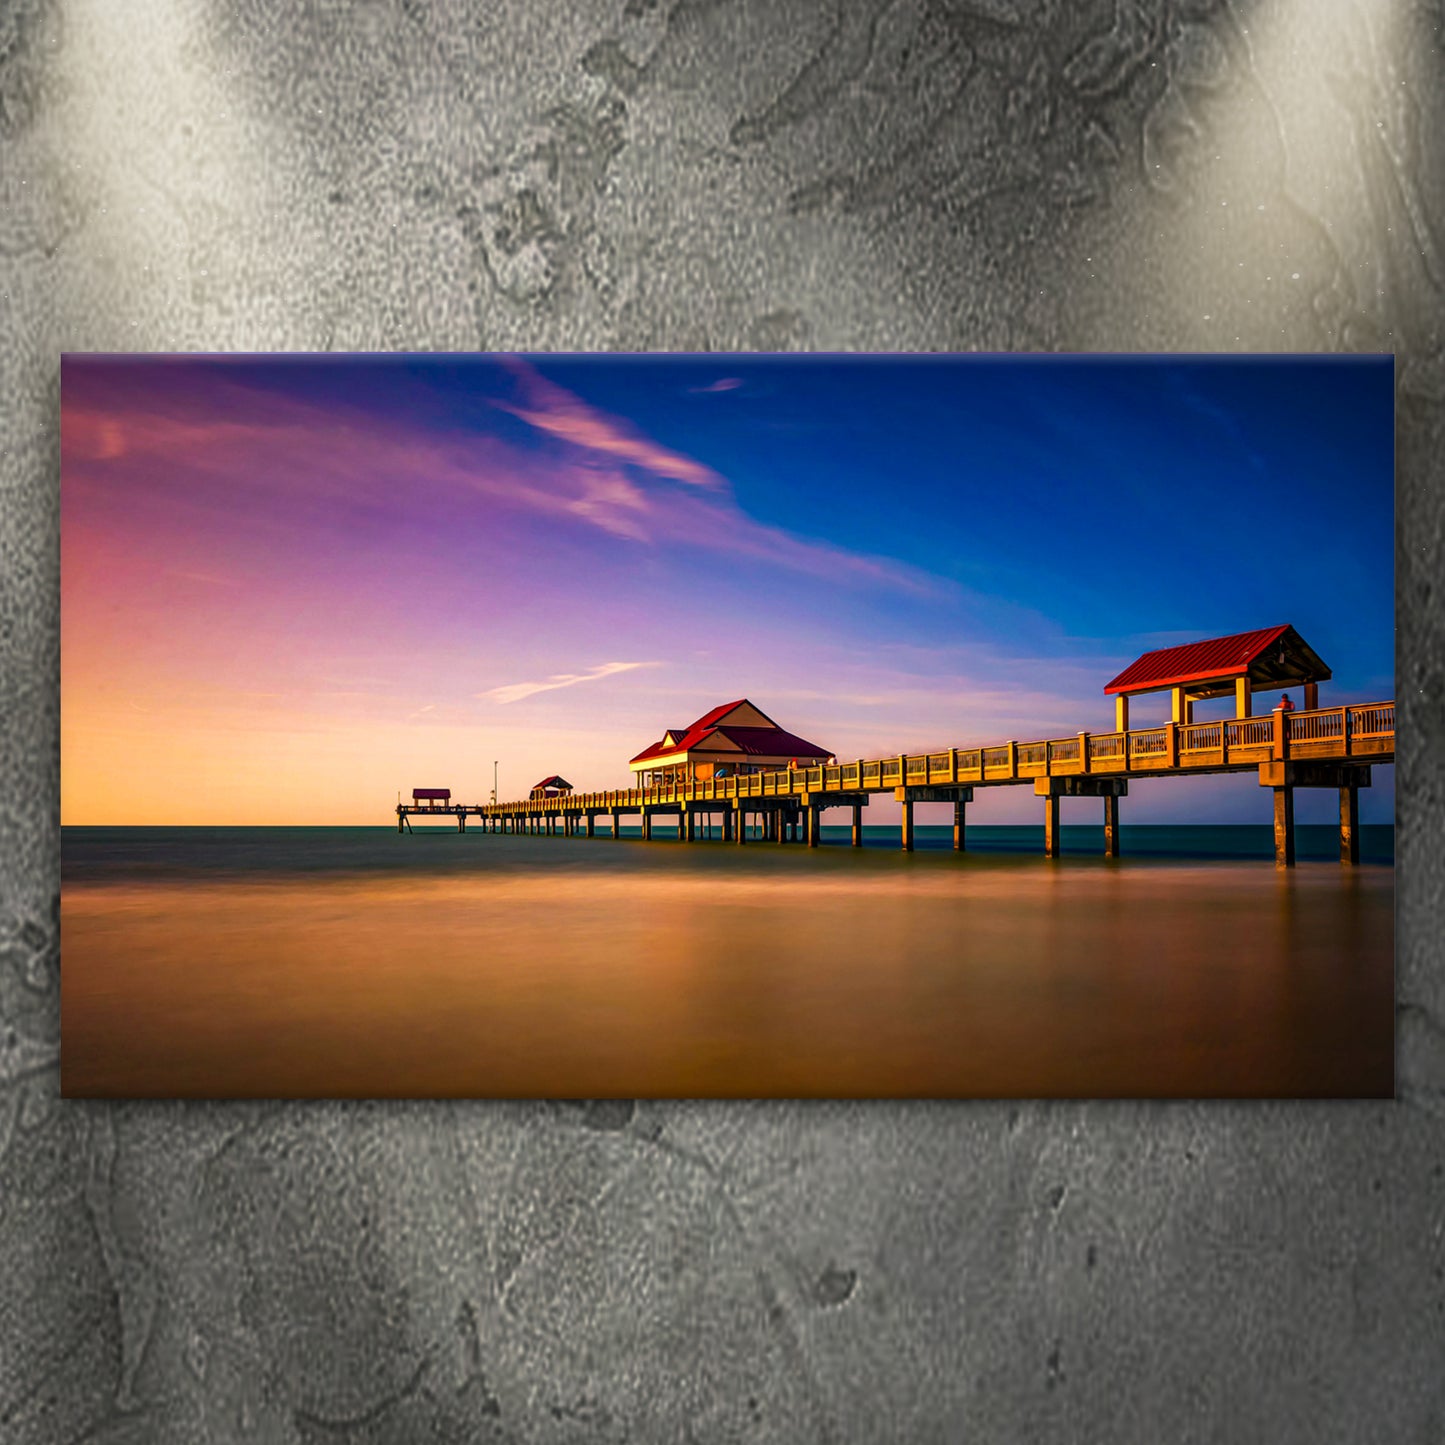 Sunset Near Pier 60 Canvas Wall Art - Image by Tailored Canvases